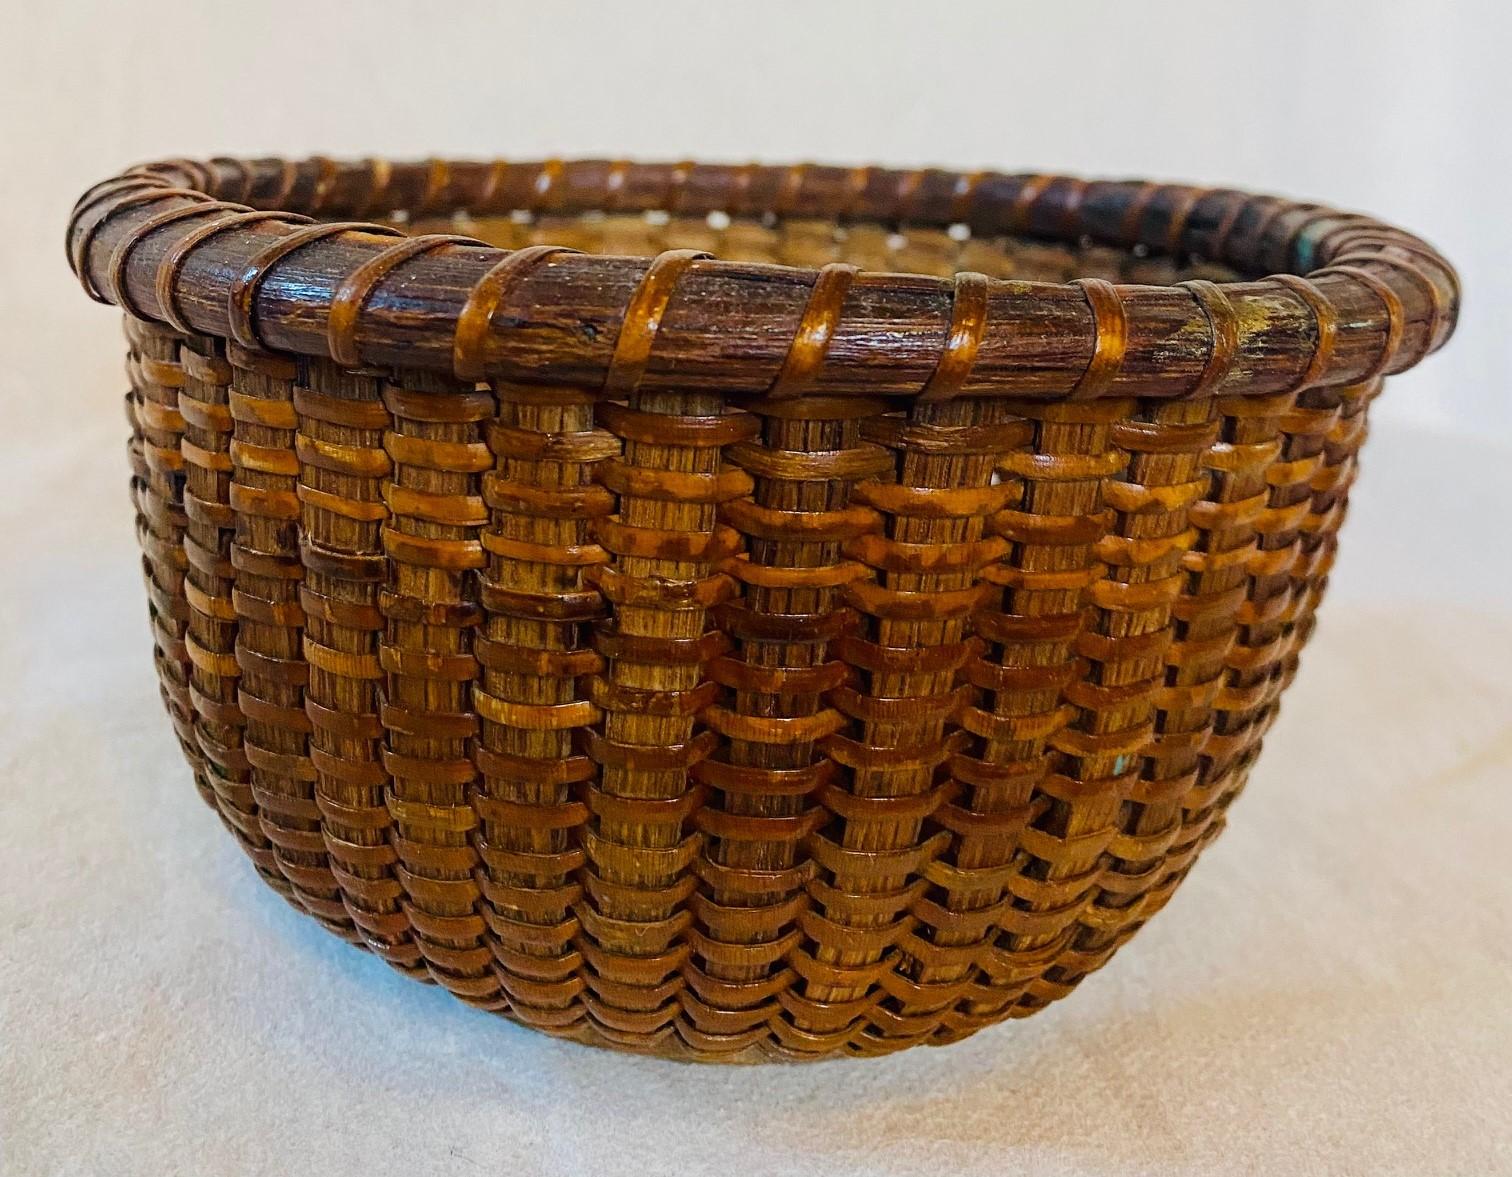 Antique nantucket basket, circa 1910, attributed to the Coffin School on Nantucket, a round open basket with cane weave on sturdy wooden staves, the slightly convex hardwood bottom plate having three scribed rings. The basket was made with no